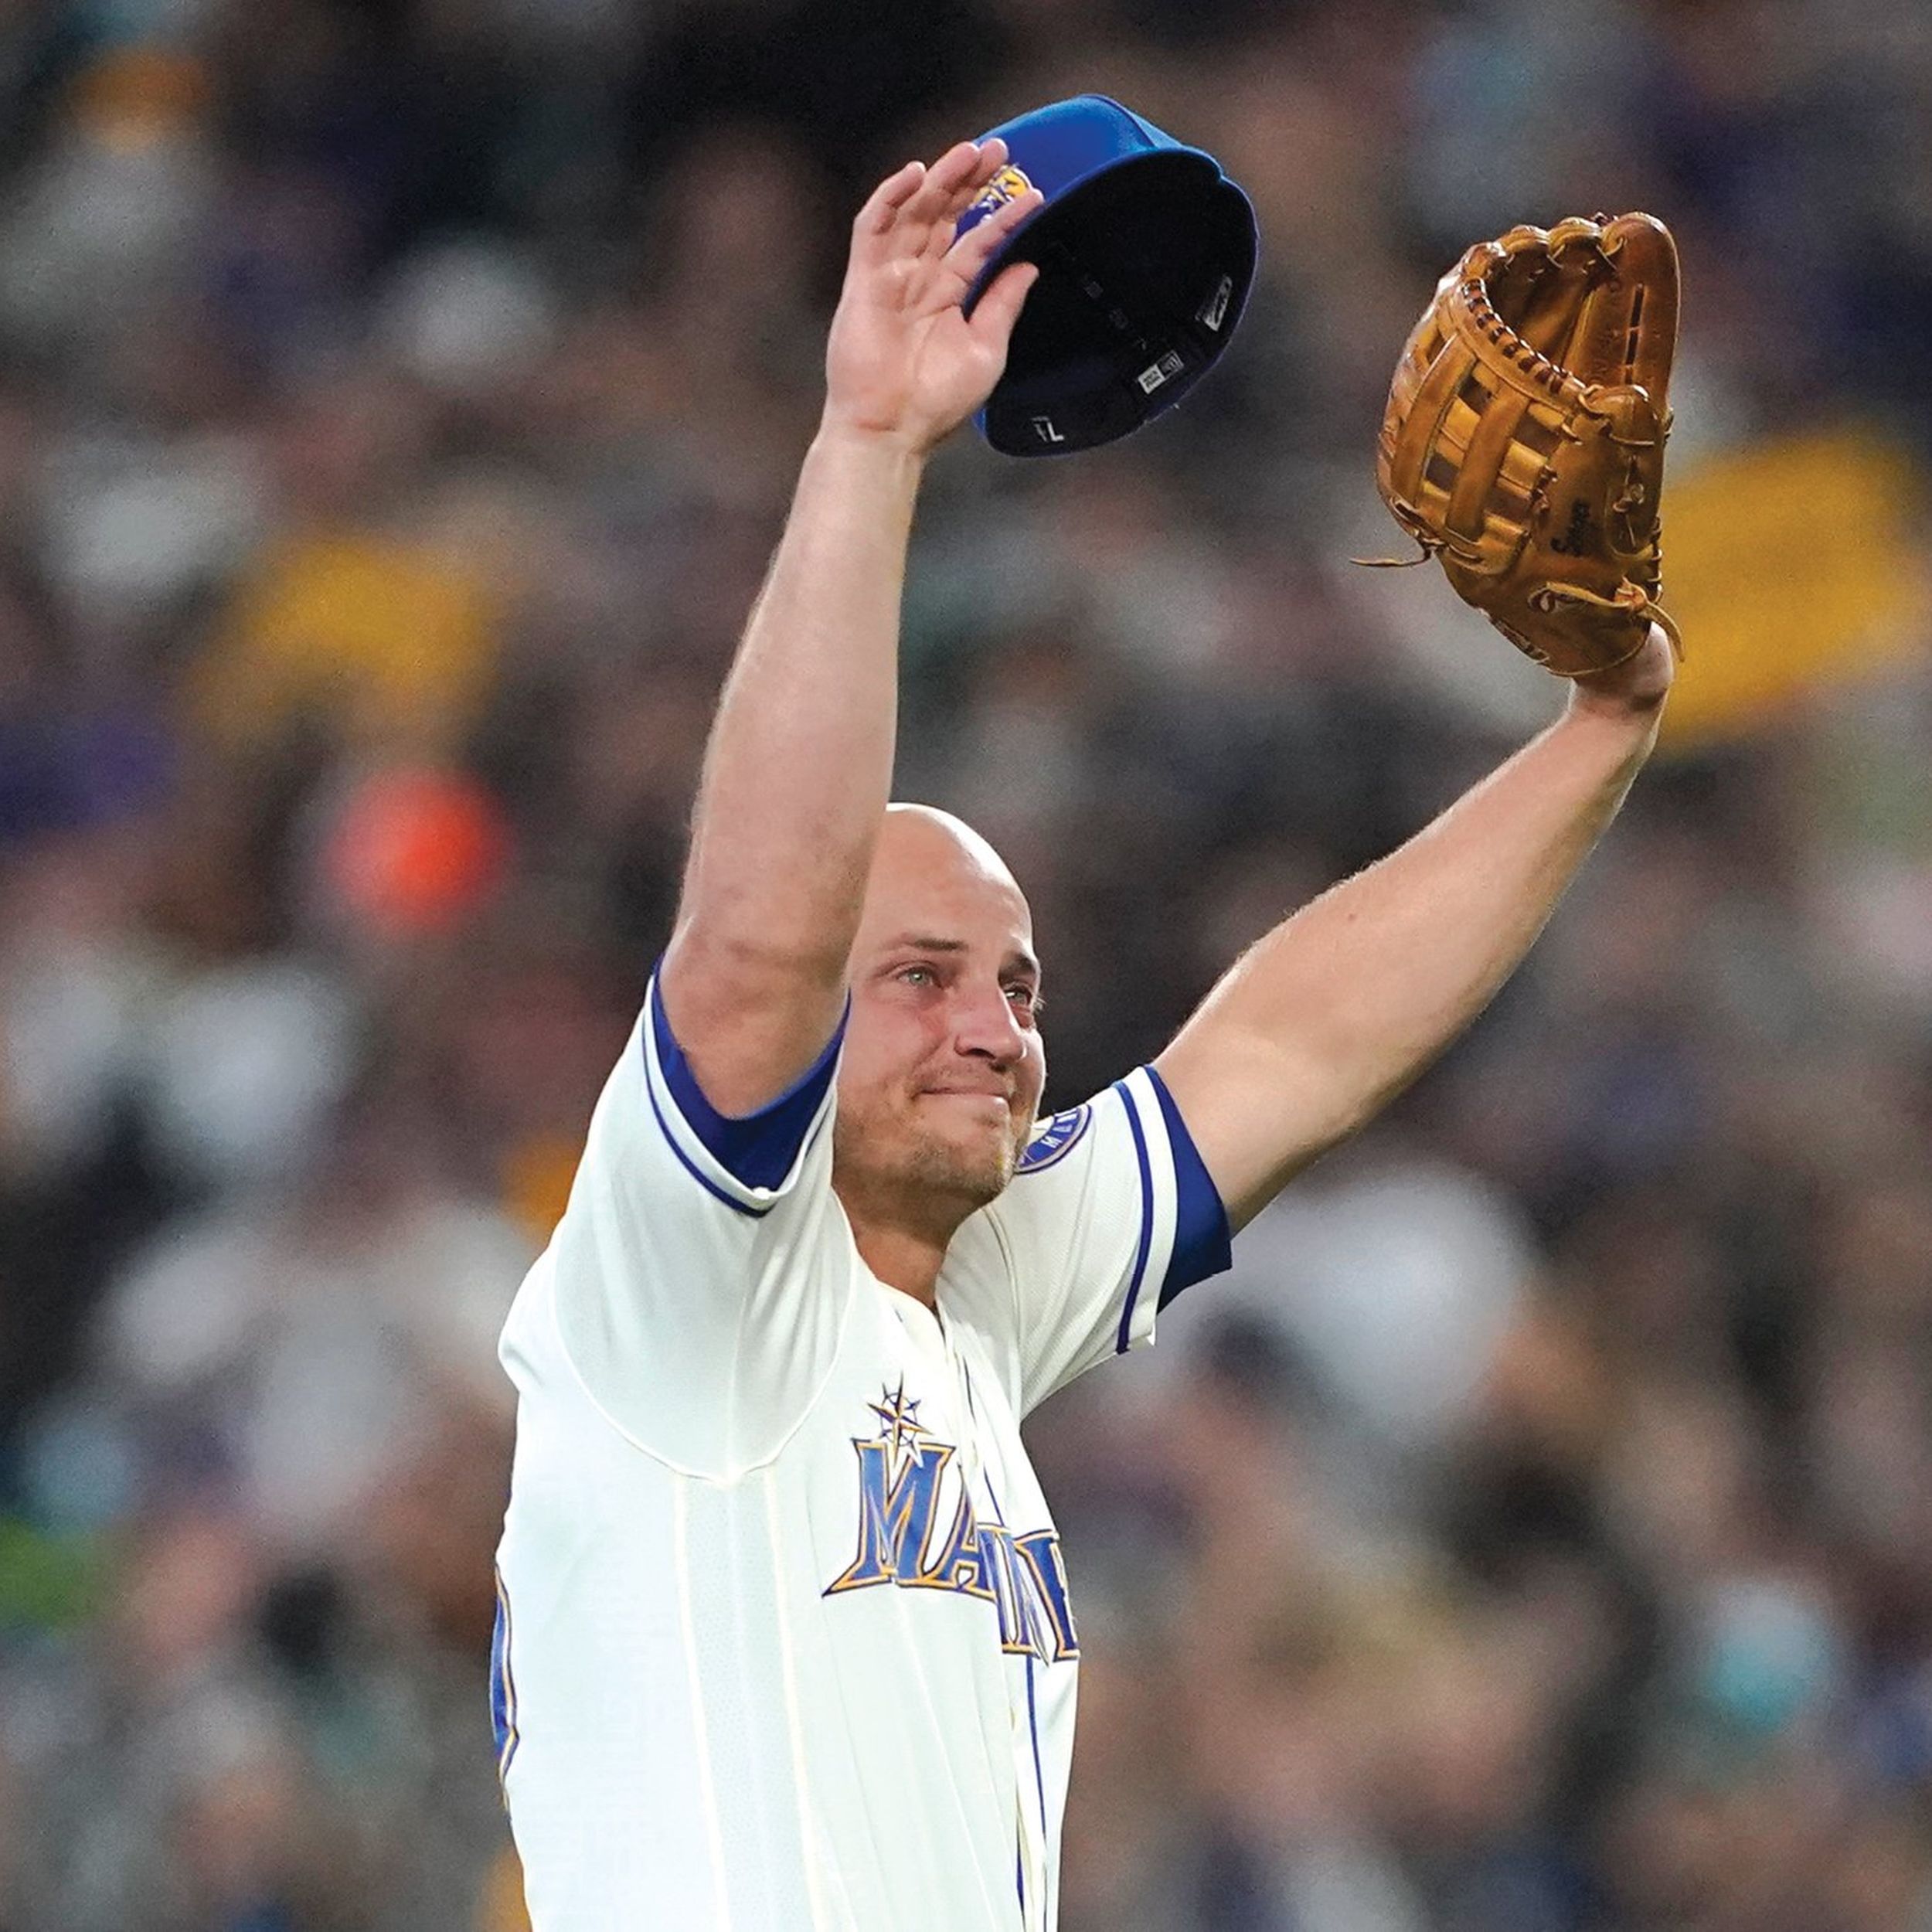 Long-time Mariners star Kyle Seager retires after 11 seasons